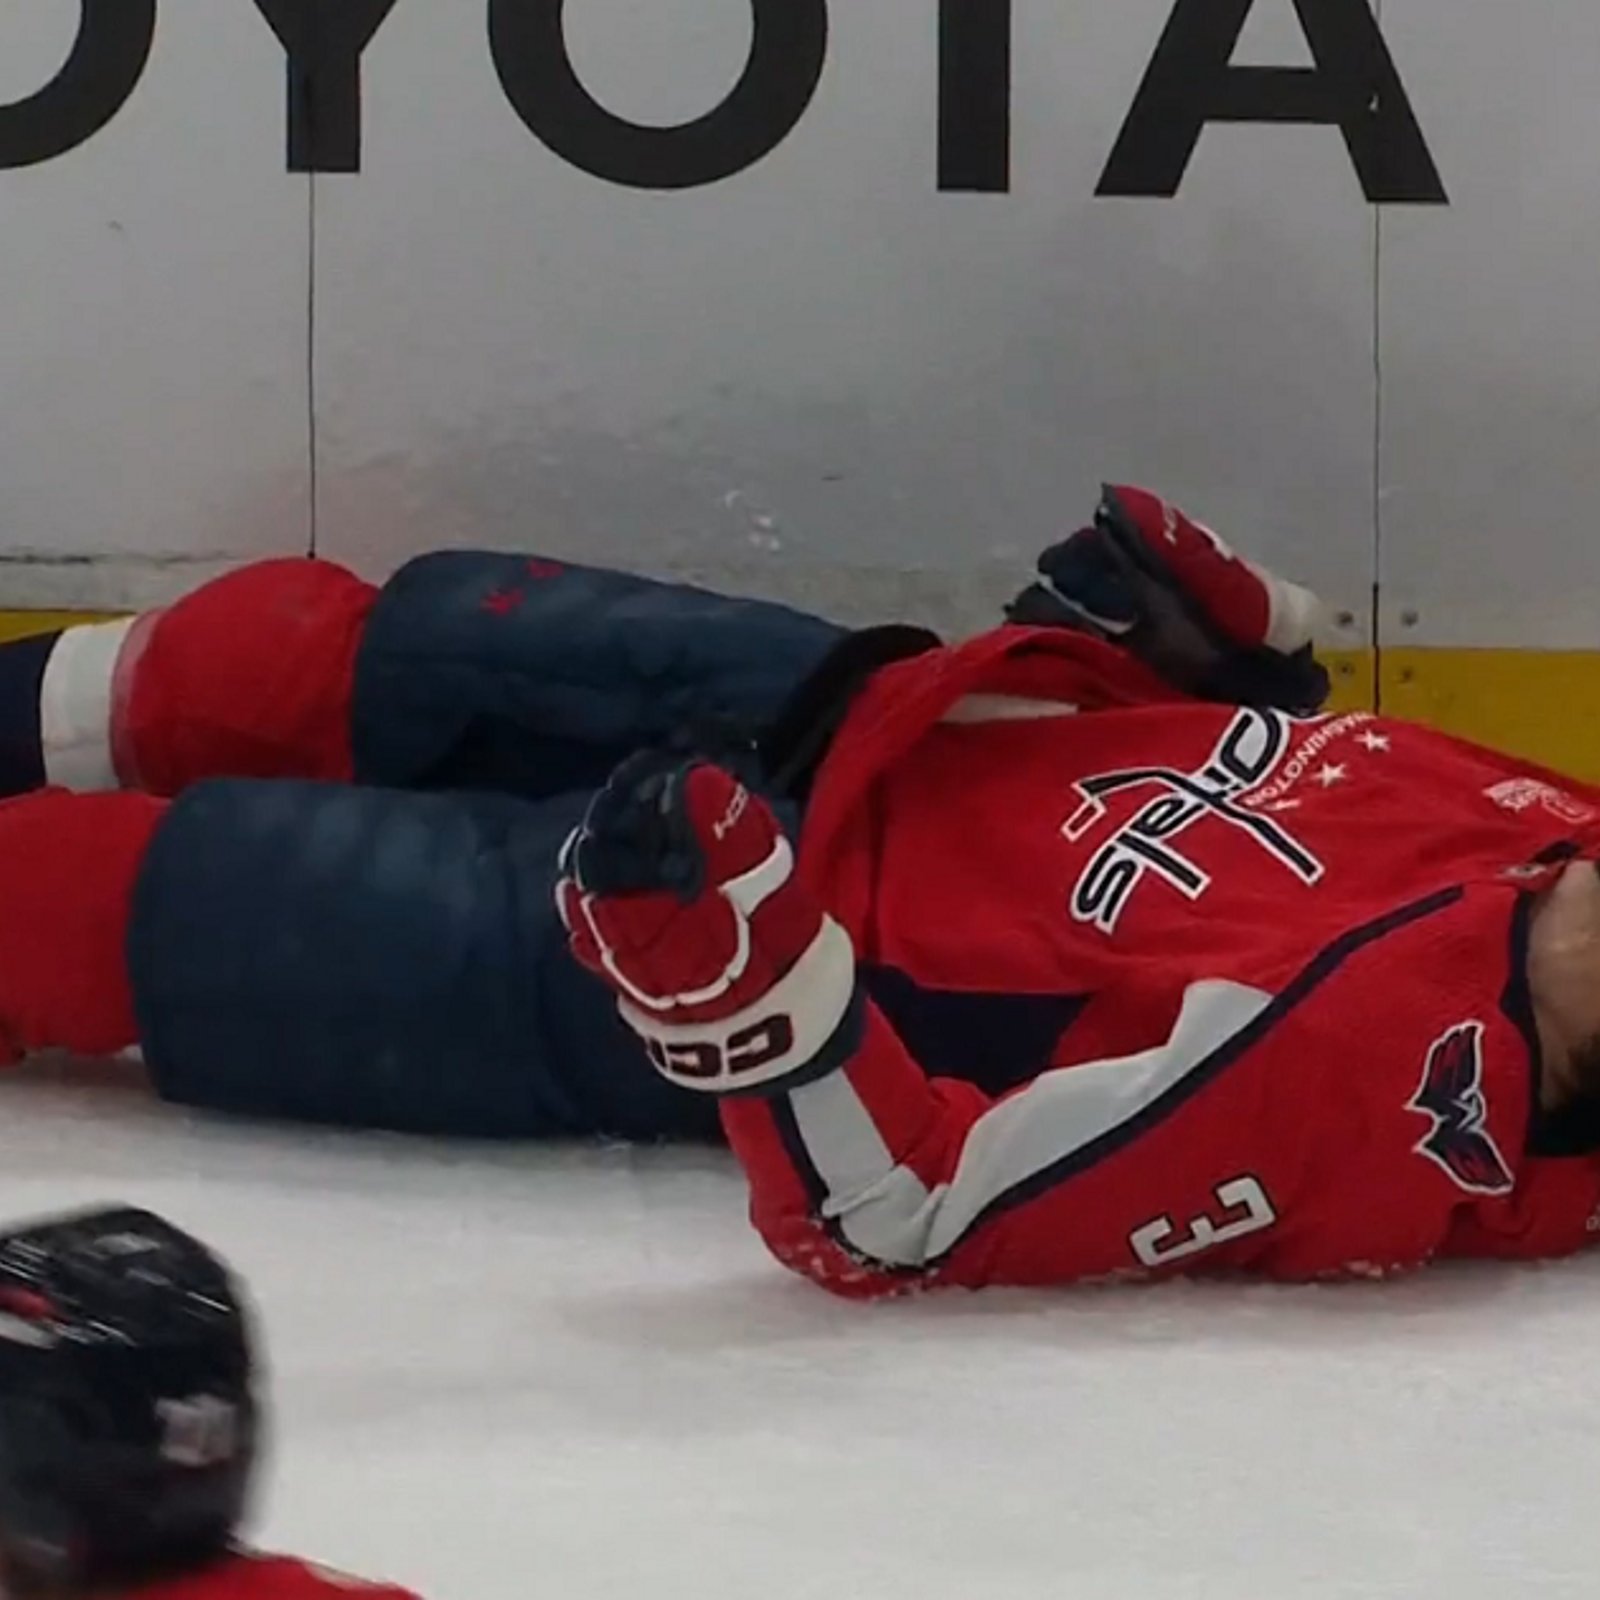 Period ends early after Nick Jensen is knocked out cold.